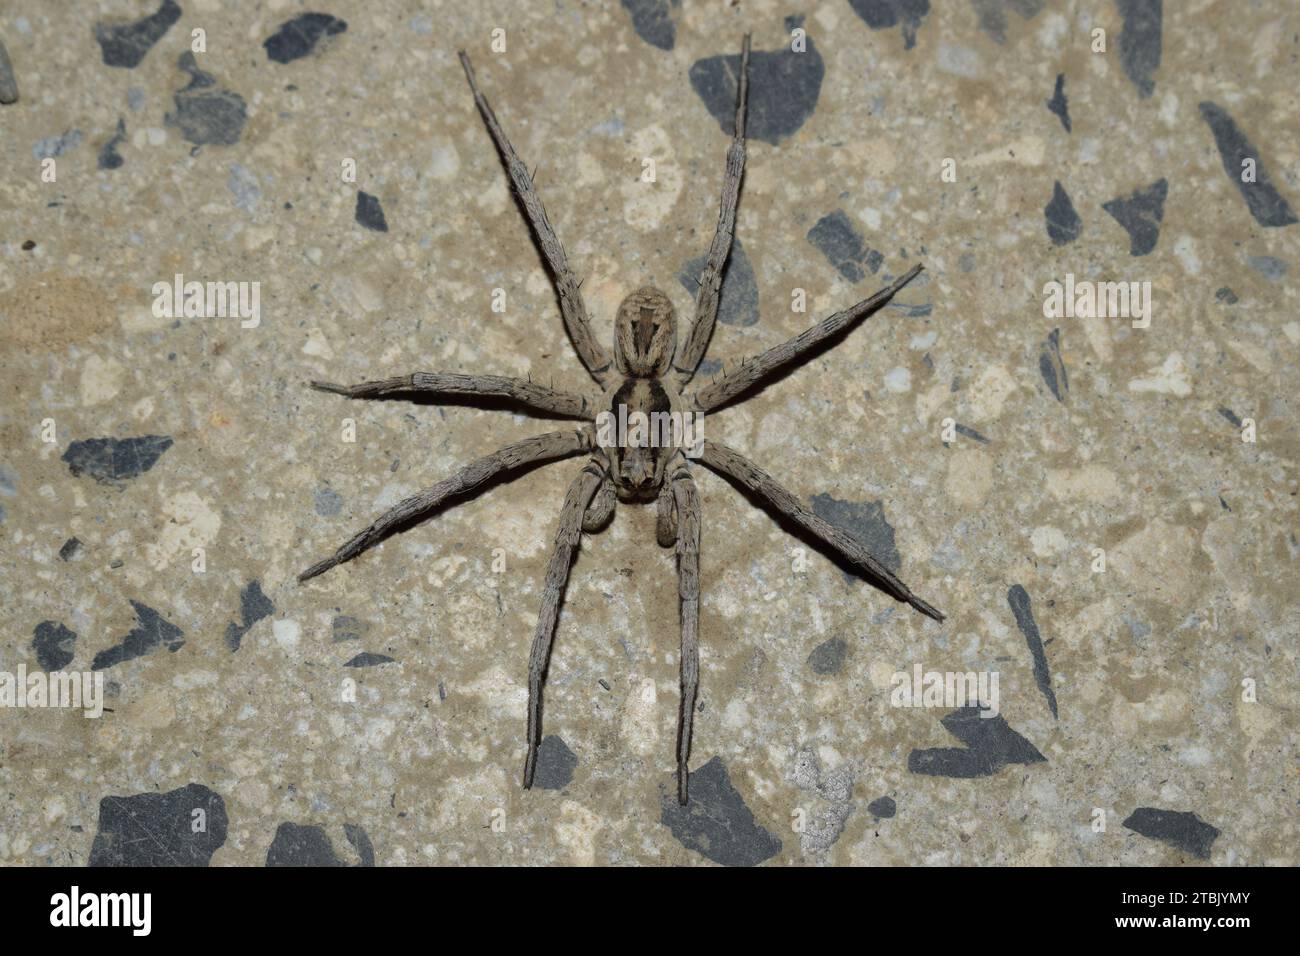 Wolf spider from above Stock Photo